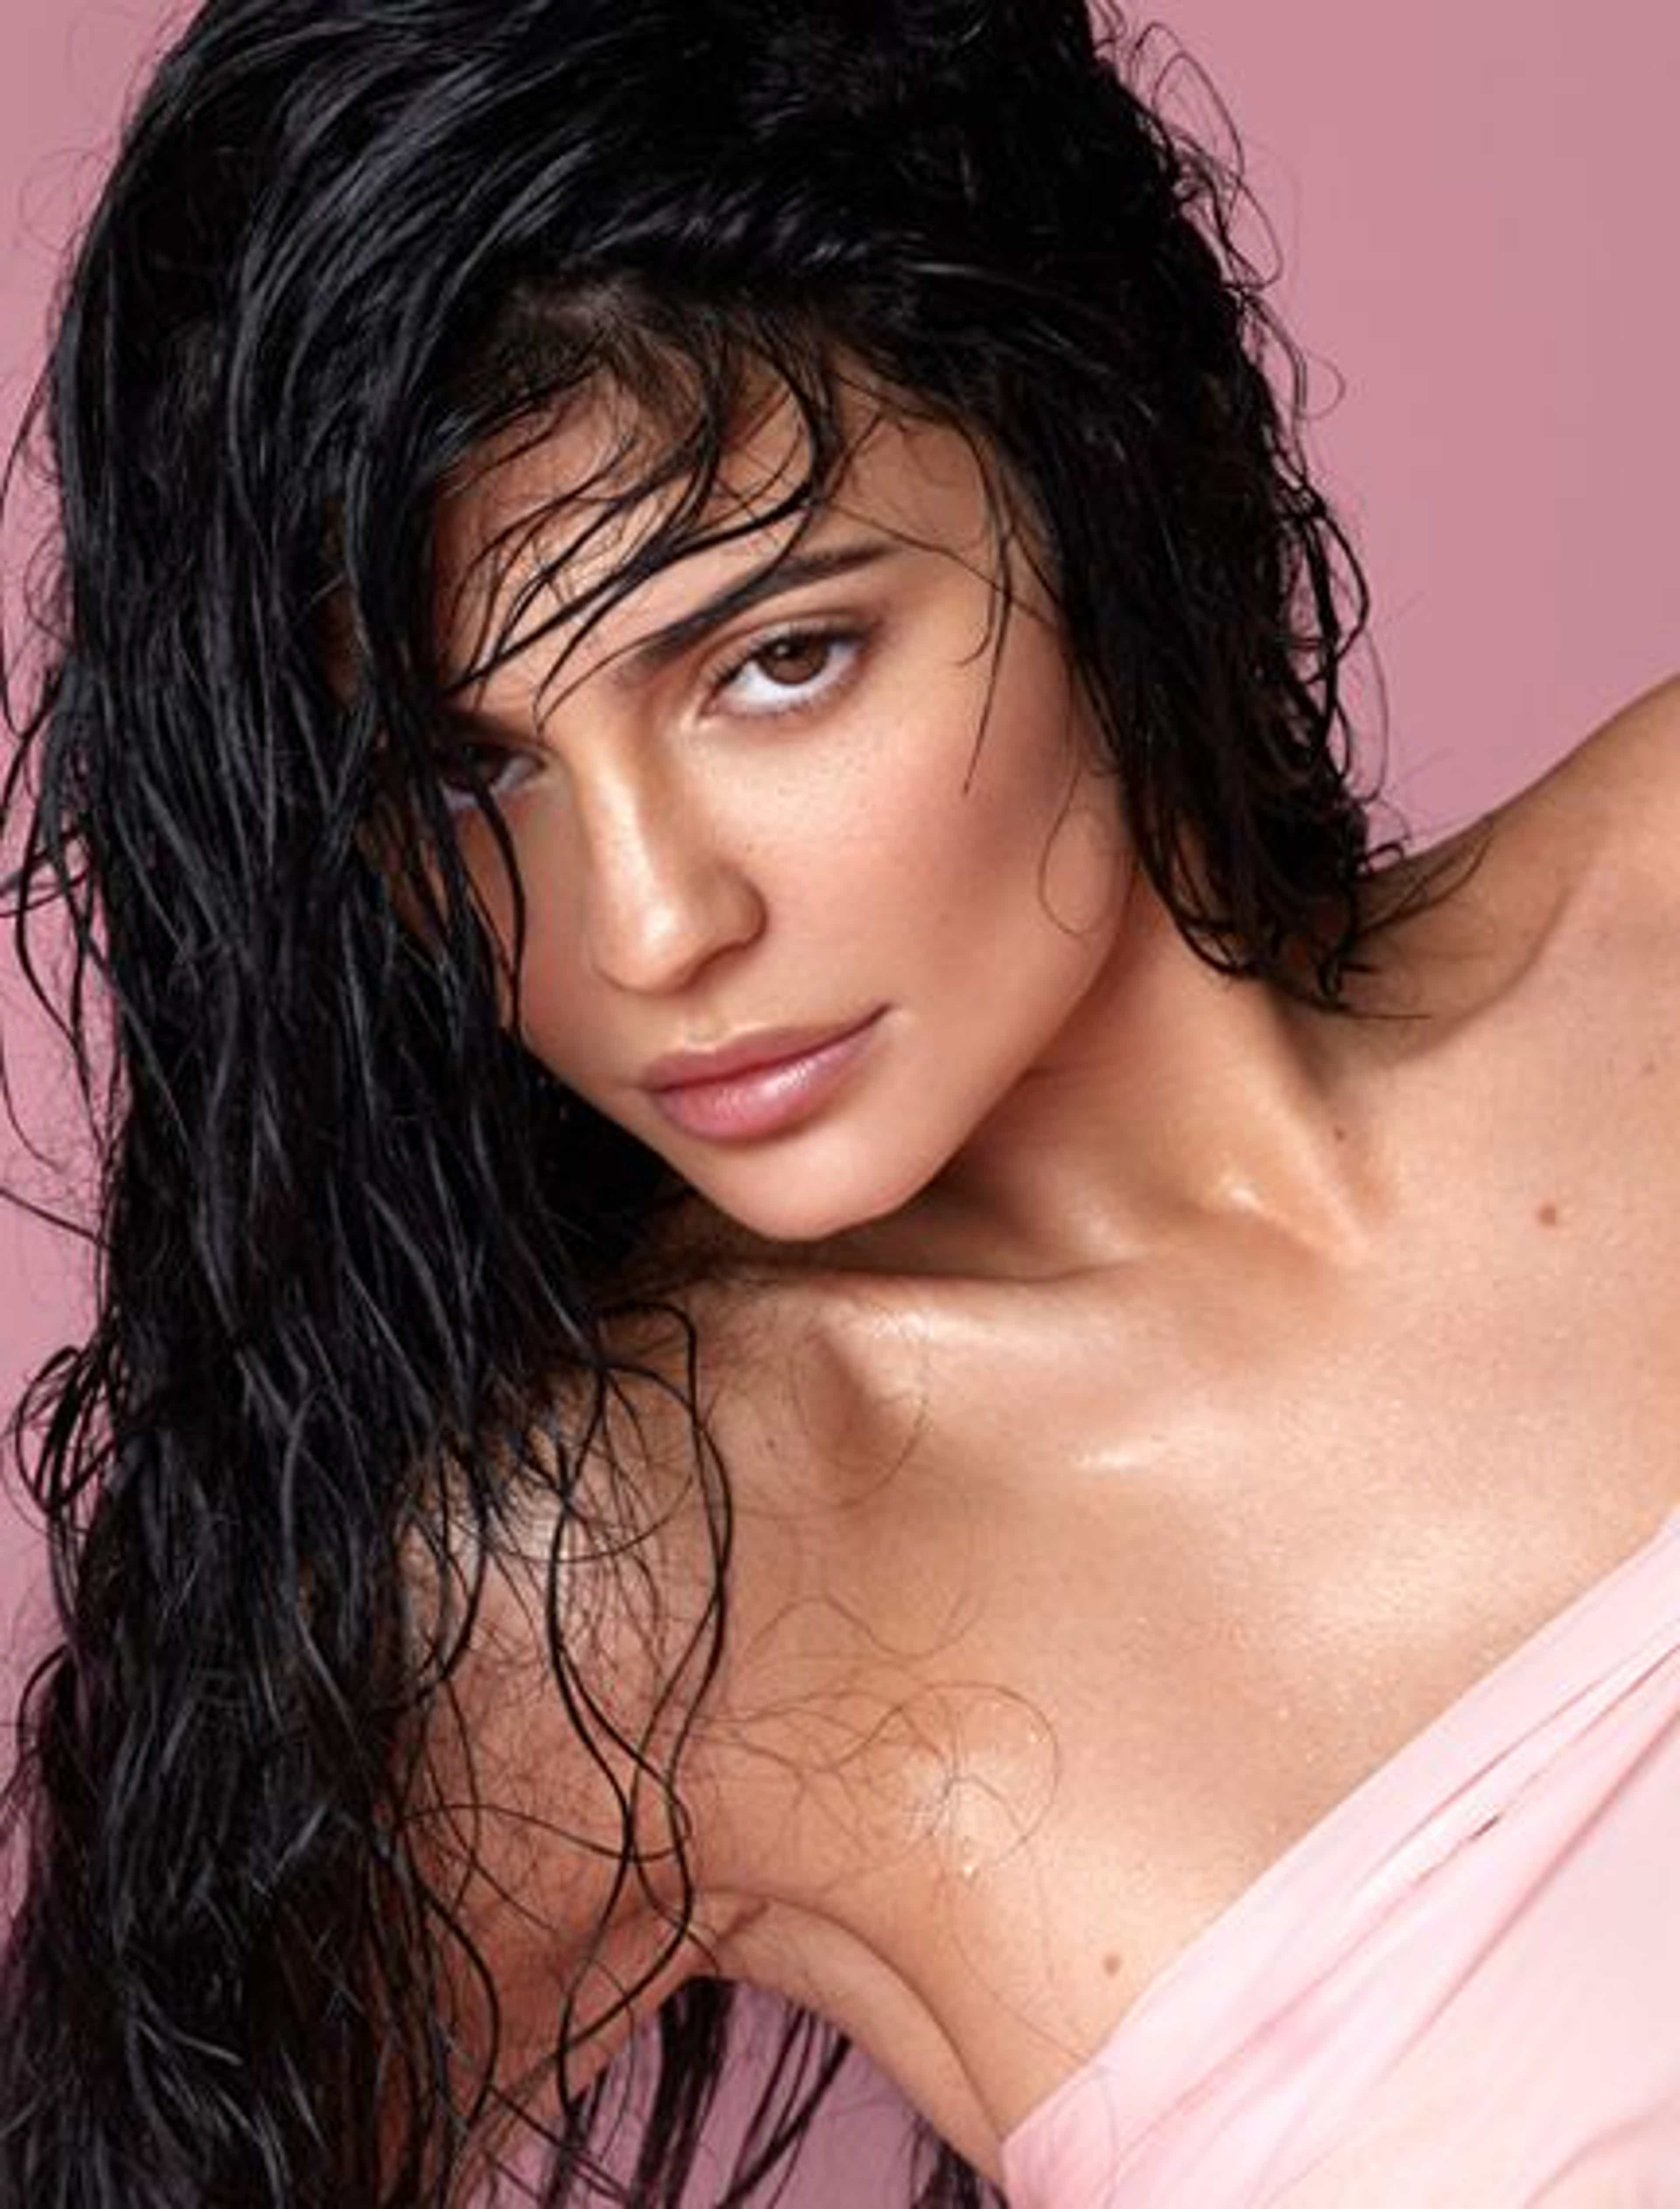 kylie-skin-about-image.jpg